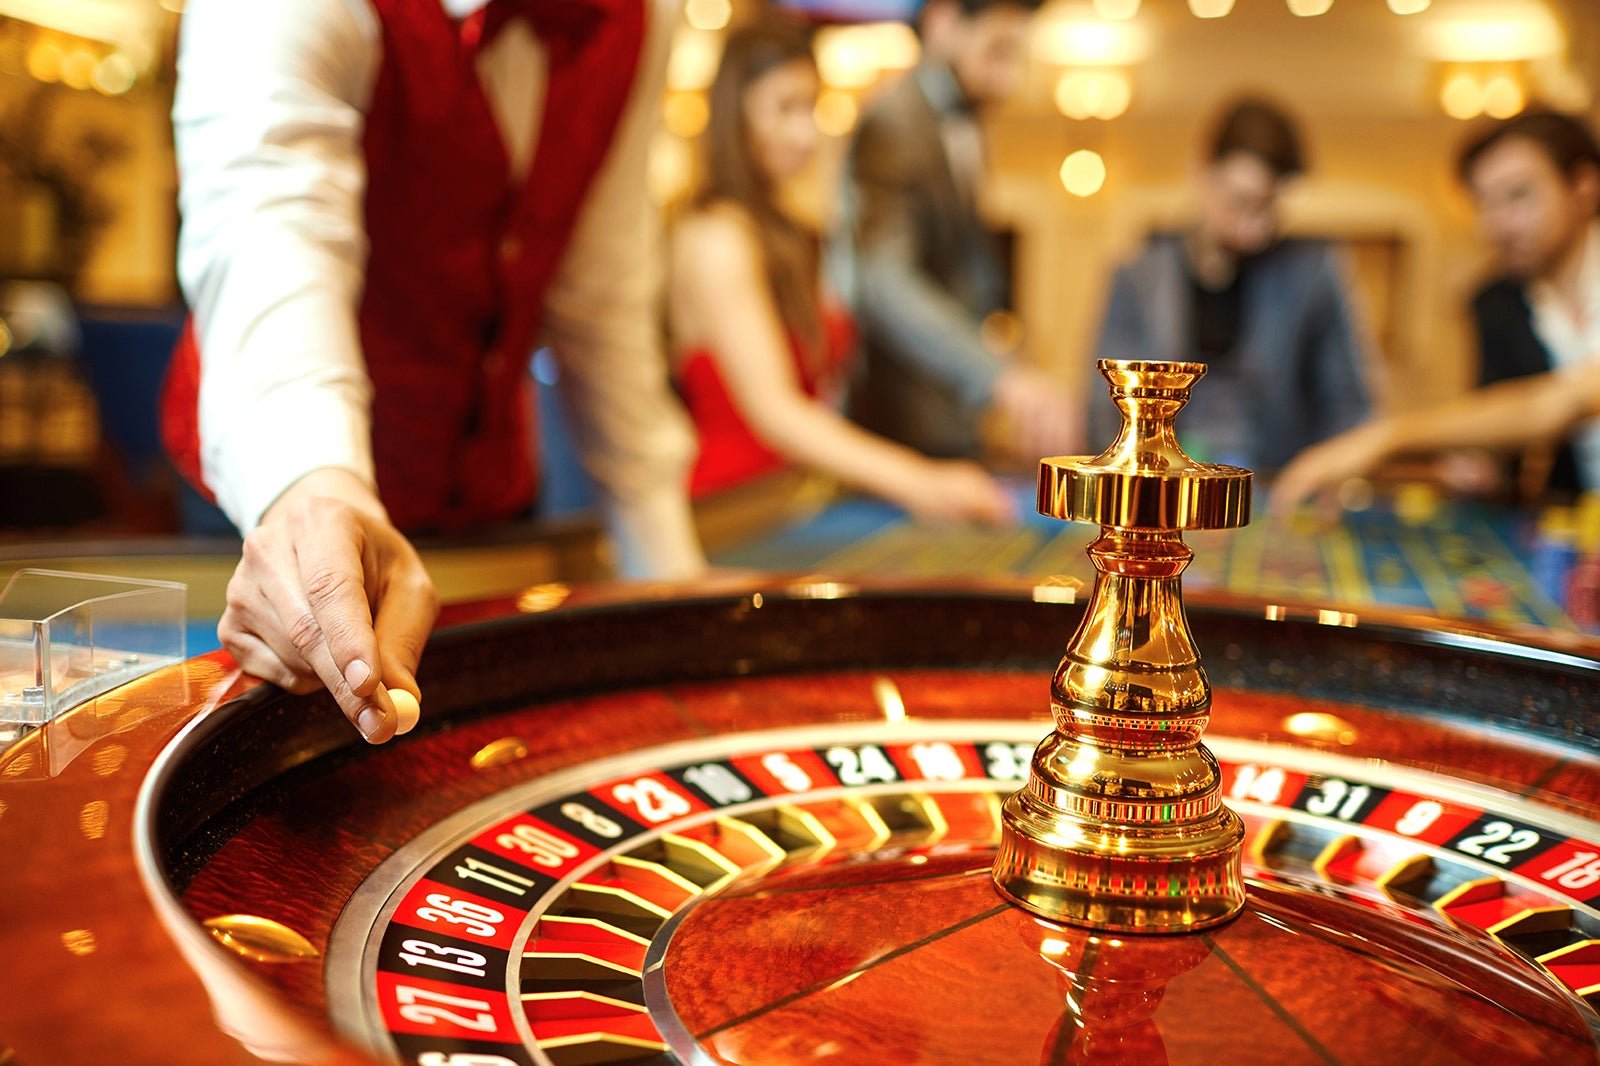 918yes Casino Offer Real-Time Casino Game Experience